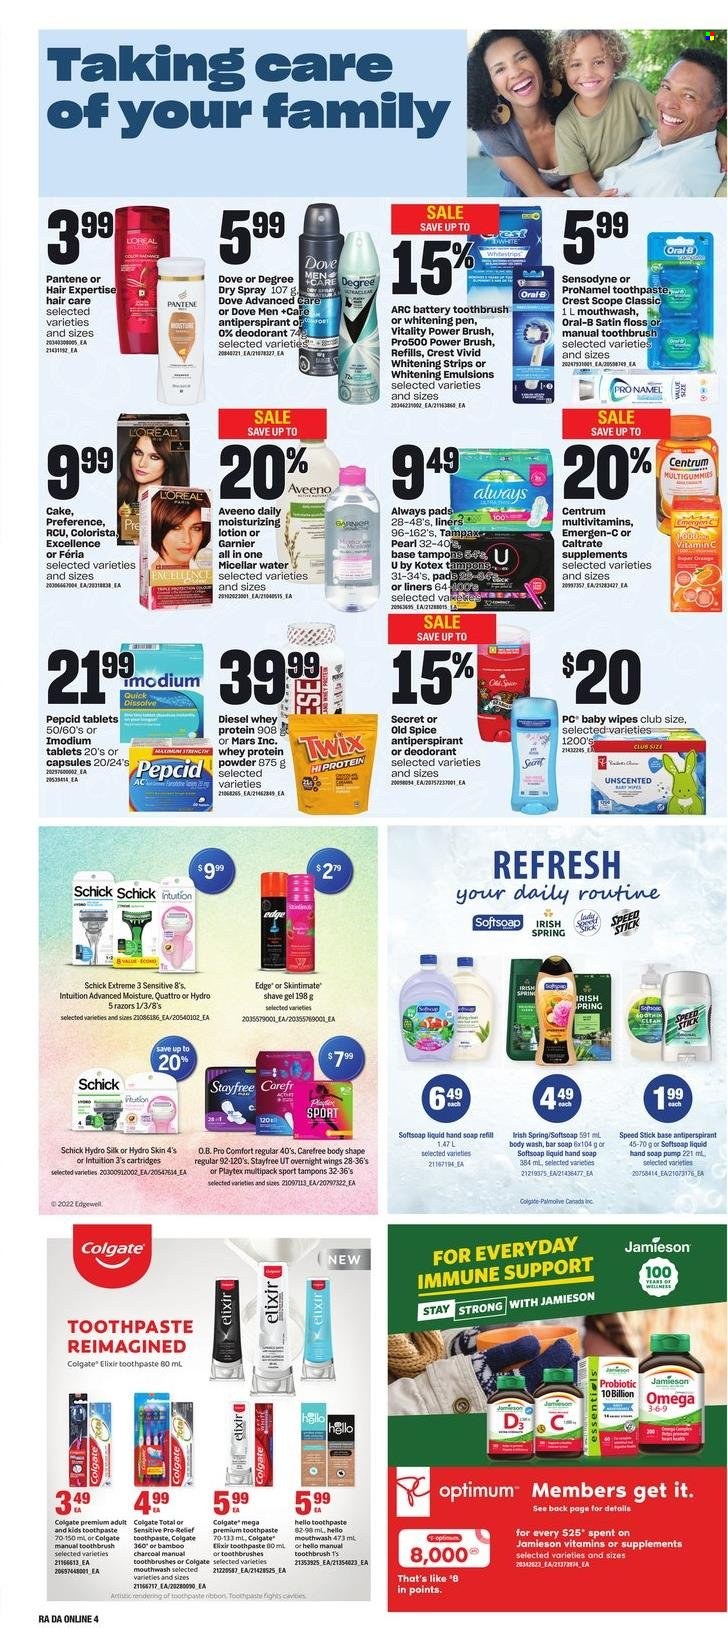 thumbnail - Dominion Flyer - January 26, 2023 - February 01, 2023 - Sales products - cake, oranges, Silk, strips, Dove, Twix, Mars, spice, wipes, baby wipes, Aveeno, body wash, Softsoap, hand soap, Palmolive, soap bar, soap, toothbrush, toothpaste, mouthwash, Crest, Stayfree, Playtex, Always pads, Carefree, Kotex, tampons, L’Oréal, micellar water, Pantene, body lotion, anti-perspirant, Speed Stick, shave gel, Schick, pen, Optimum, multivitamin, vitamin c, Pepcid, Omega-3, whey protein, vitamin D3, Centrum, Colgate, Garnier, Tampax, Imodium, Old Spice, Oral-B, Sensodyne, deodorant. Page 12.